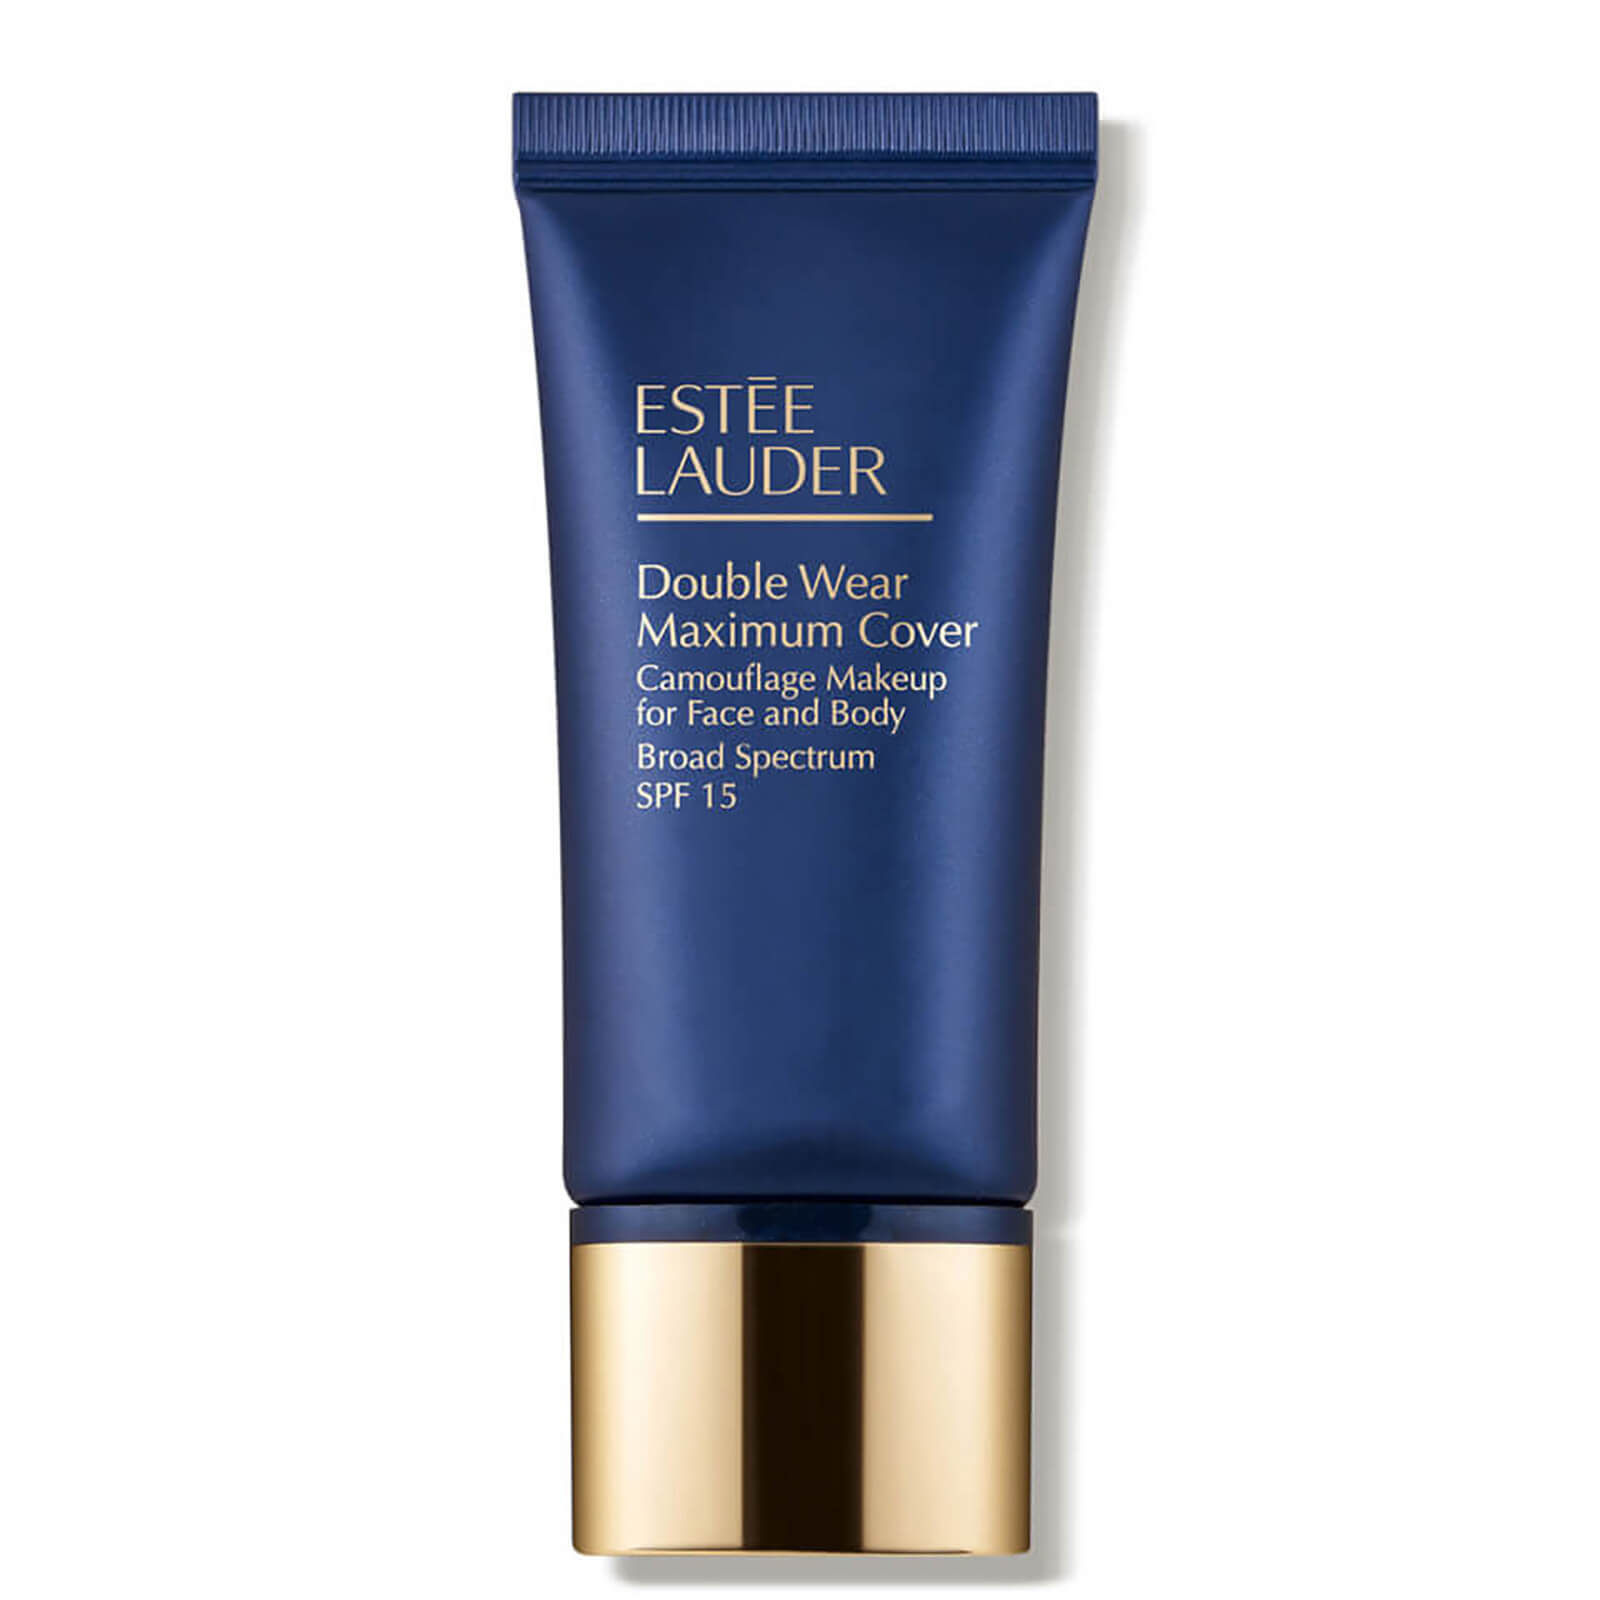 Estee Lauder Double Wear Maximum Cover Camouflage Makeup for Face and Body SPF15 30ml - 3N1 Ivory Be